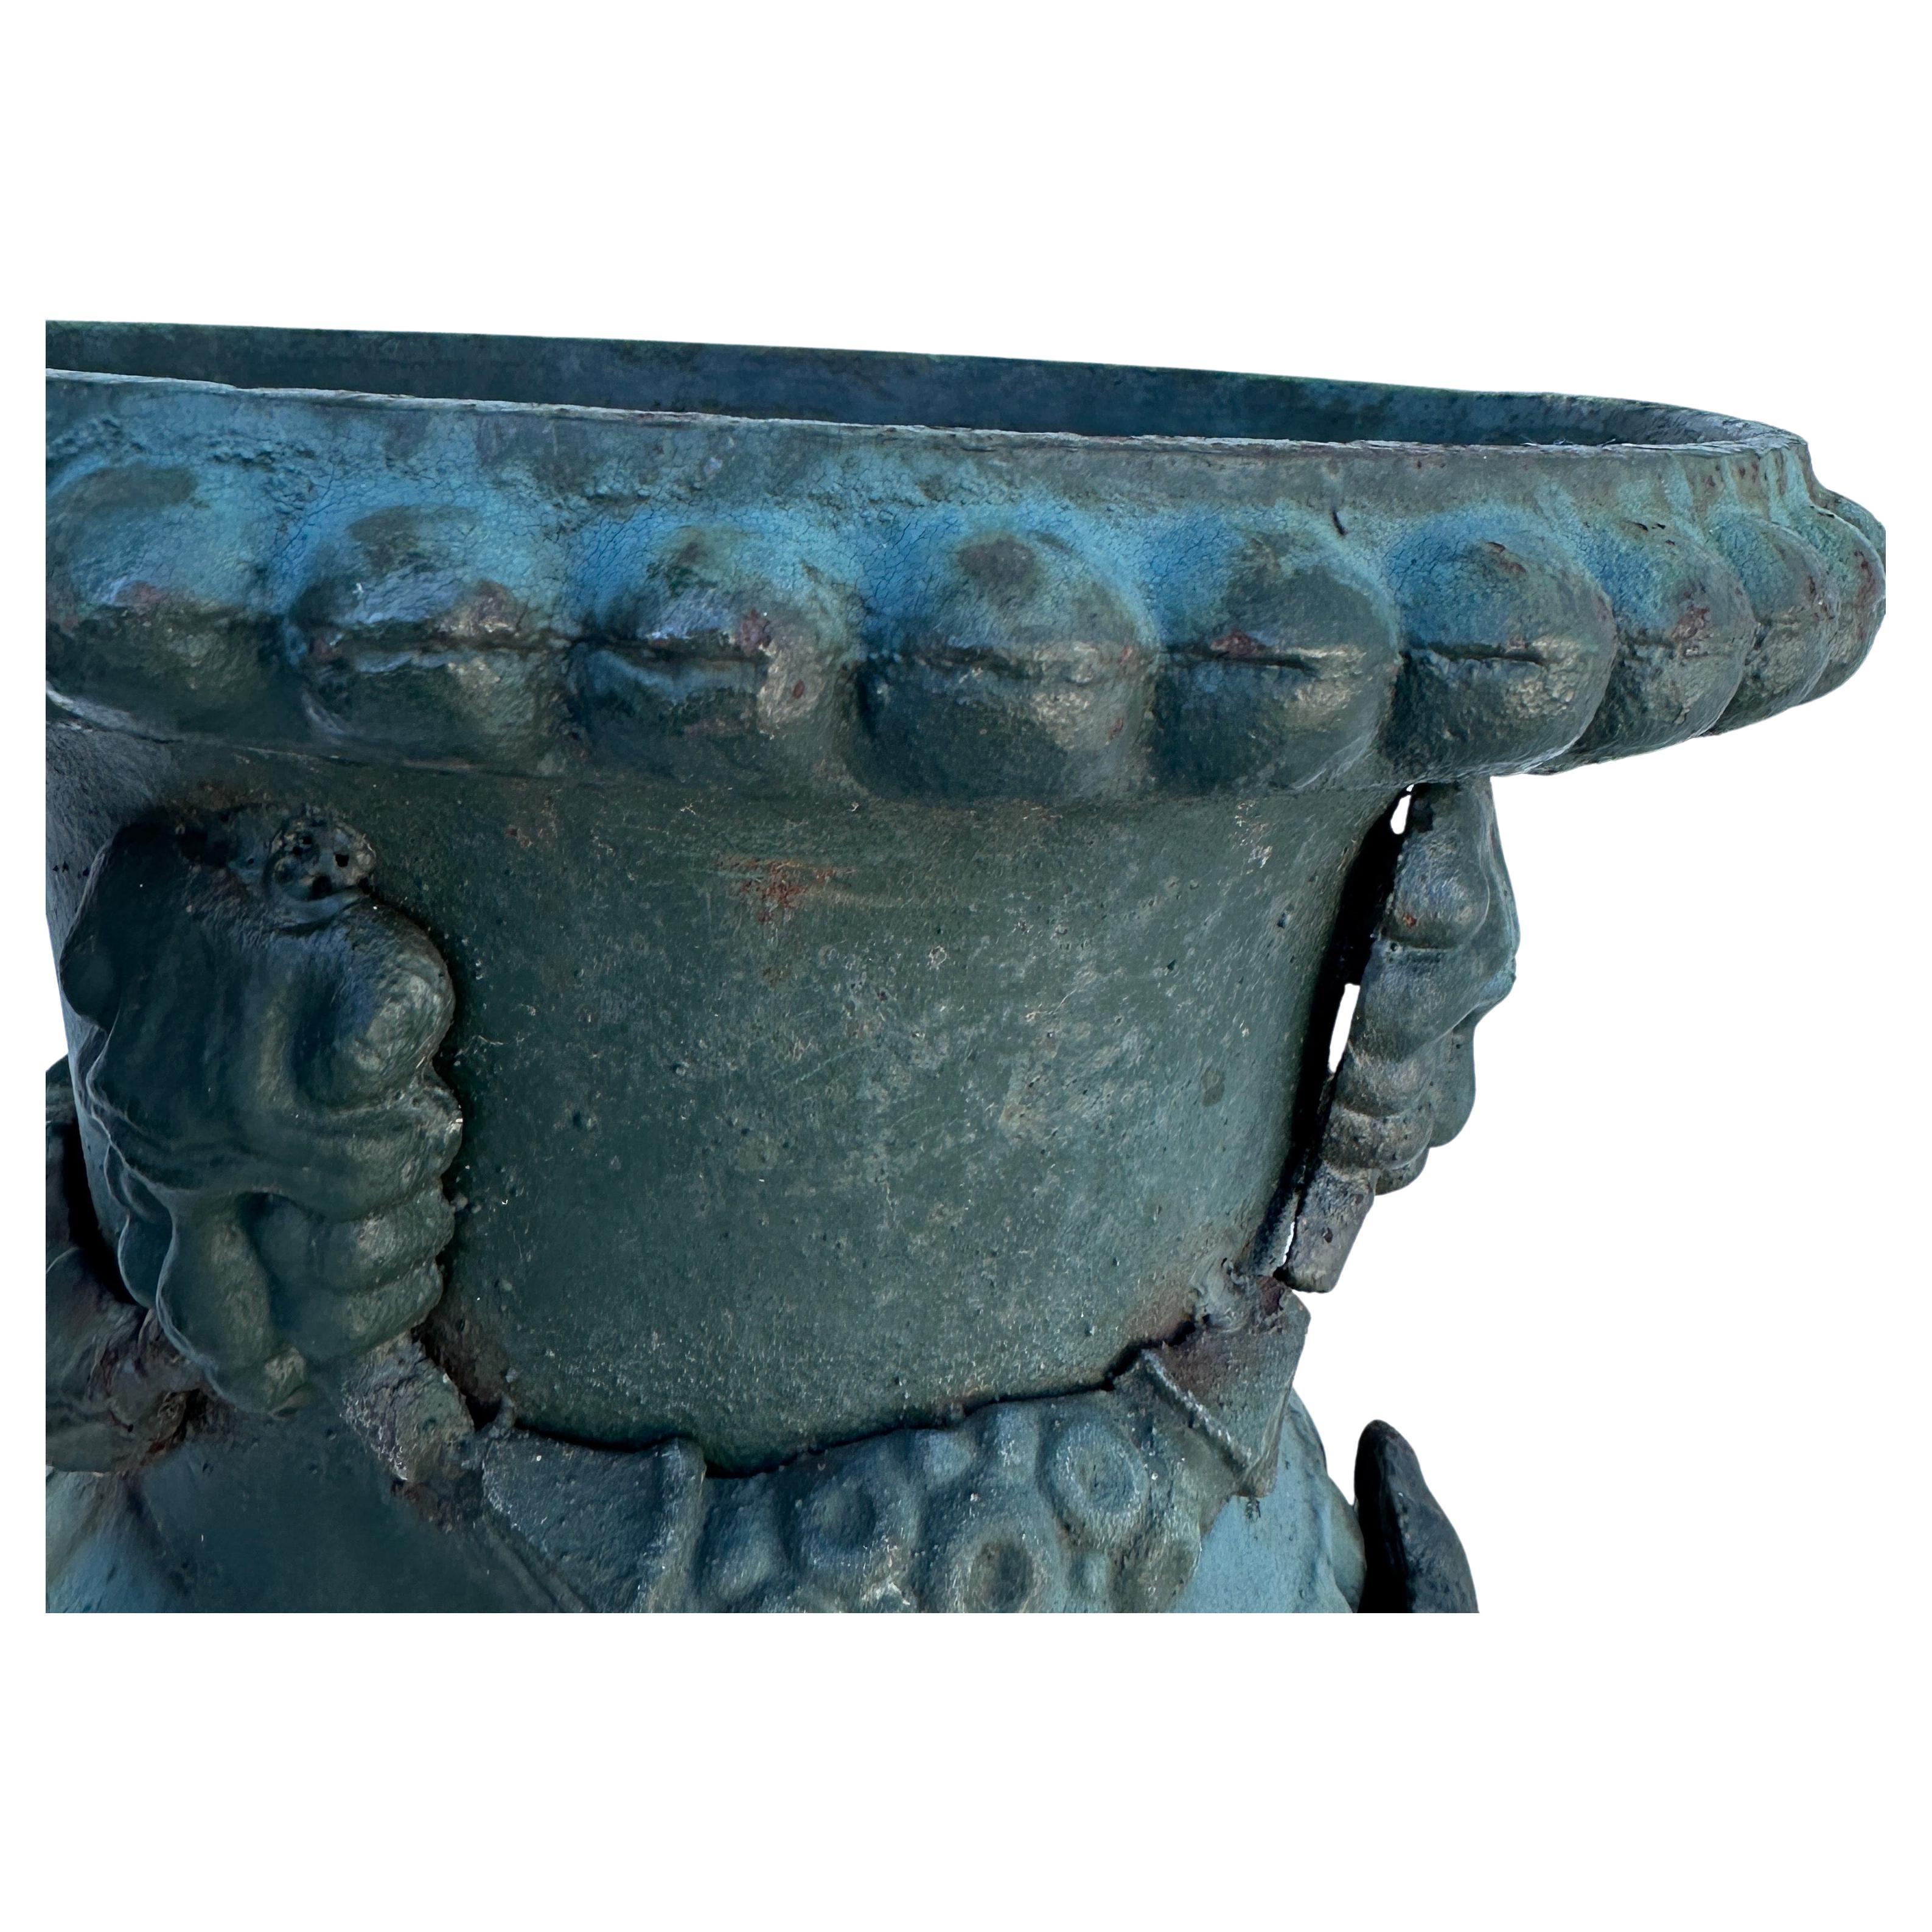 Cast Iron Classical Urn Planter with Handles, France

Exceptional and substantial cast iron piece featuring faces and a relief garland decoration. Wonderful patina and statement piece used indoors or outdoors. 